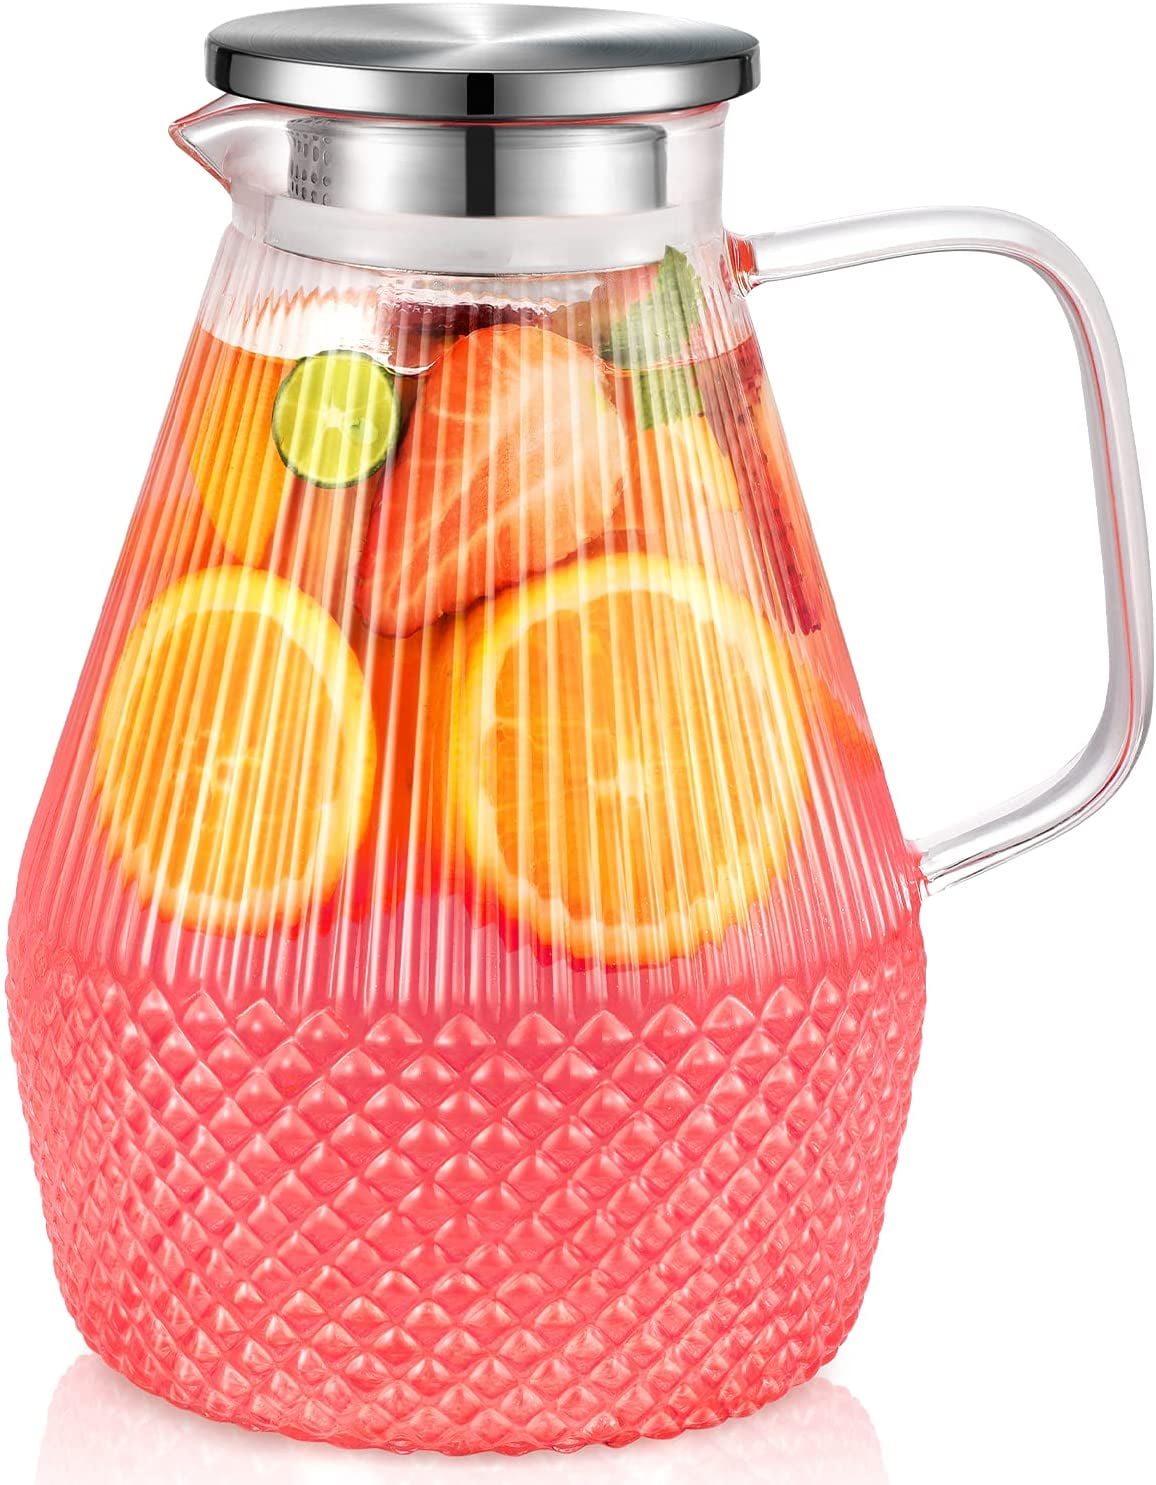 Glass Carafe Pitcher - 34oz Water Carafe Set for Mimosa Bar - Juice Containers with Airtight Lids for Fridge, 3 Pack Tea Pitcher for Juice, Milk, Cold